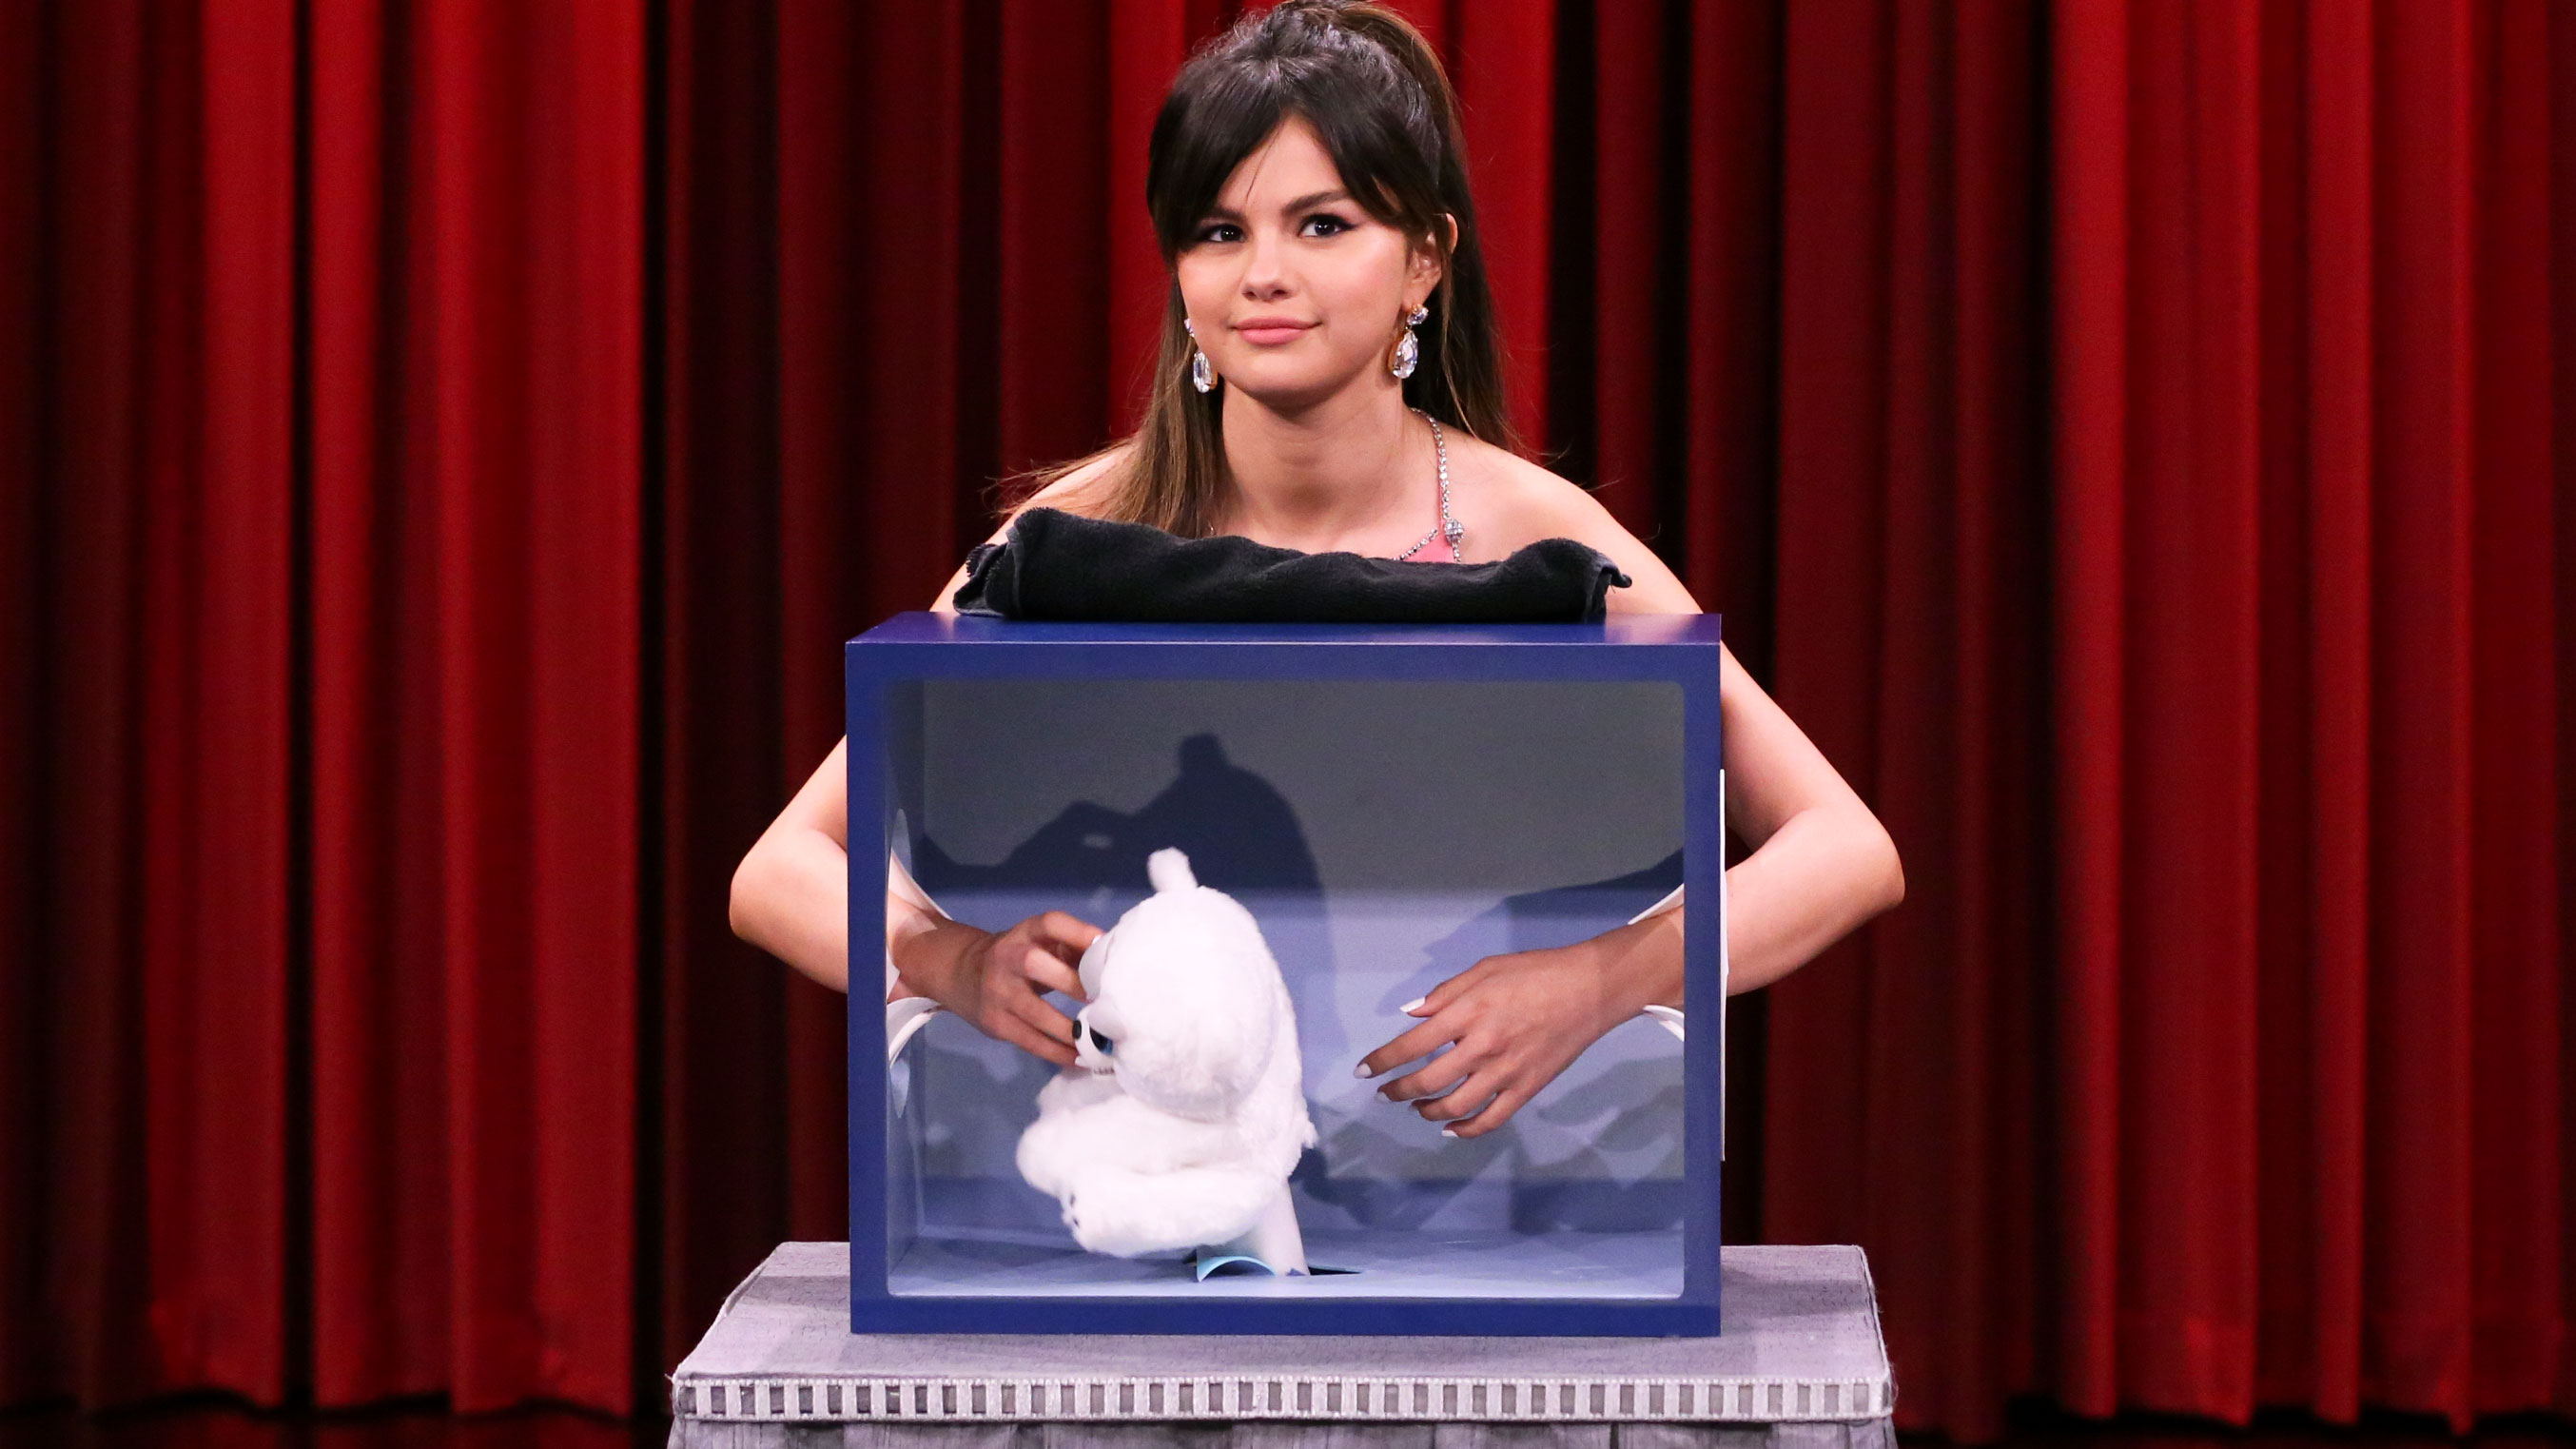 Watch The Tonight Show Starring Jimmy Fallon Highlight: Can You Feel It? with Selena ...